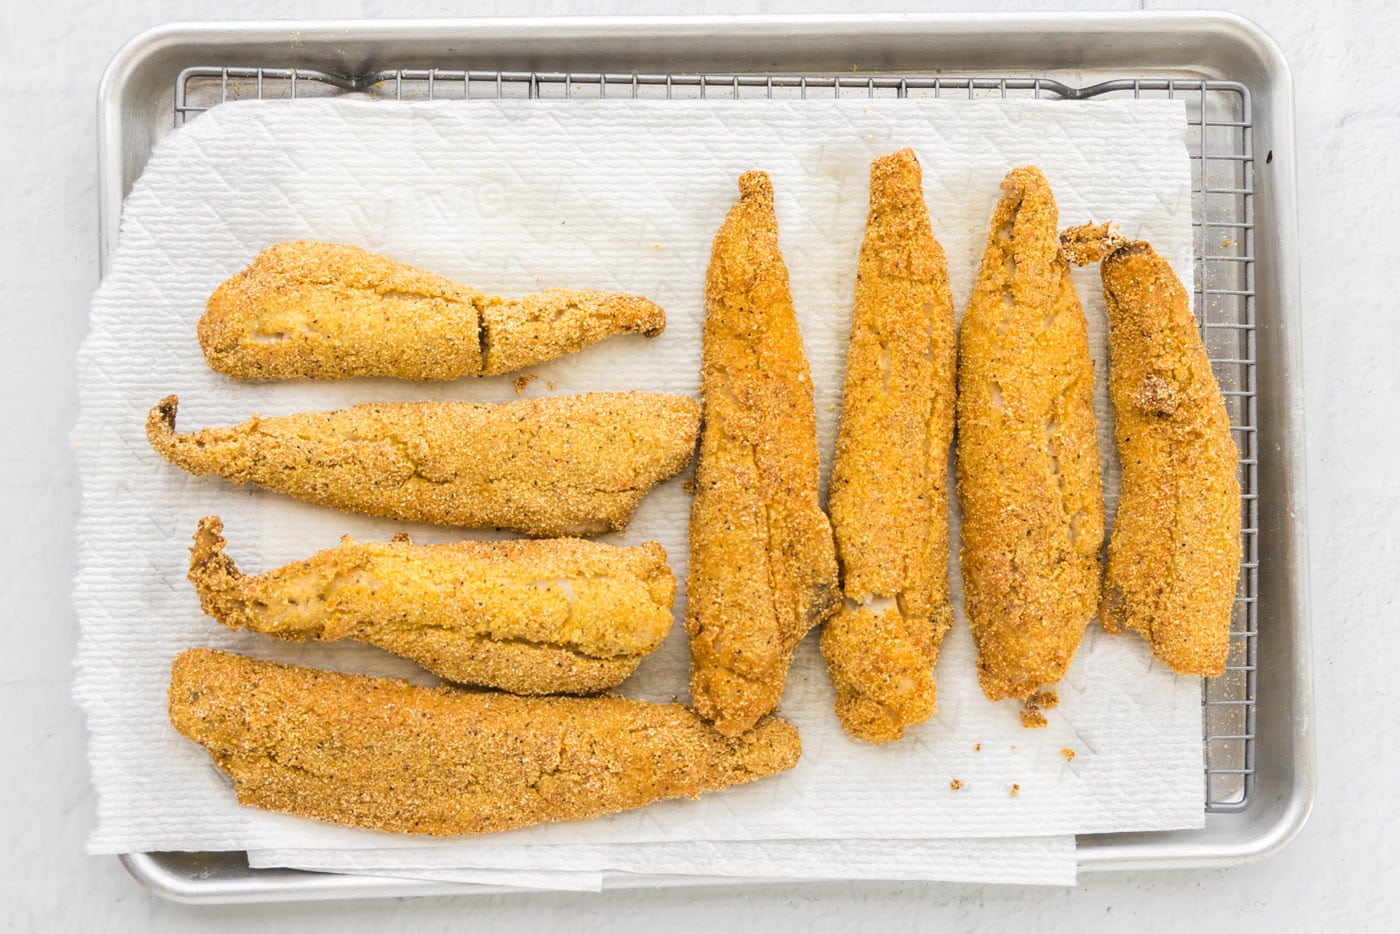 fried whiting fish on paper towels